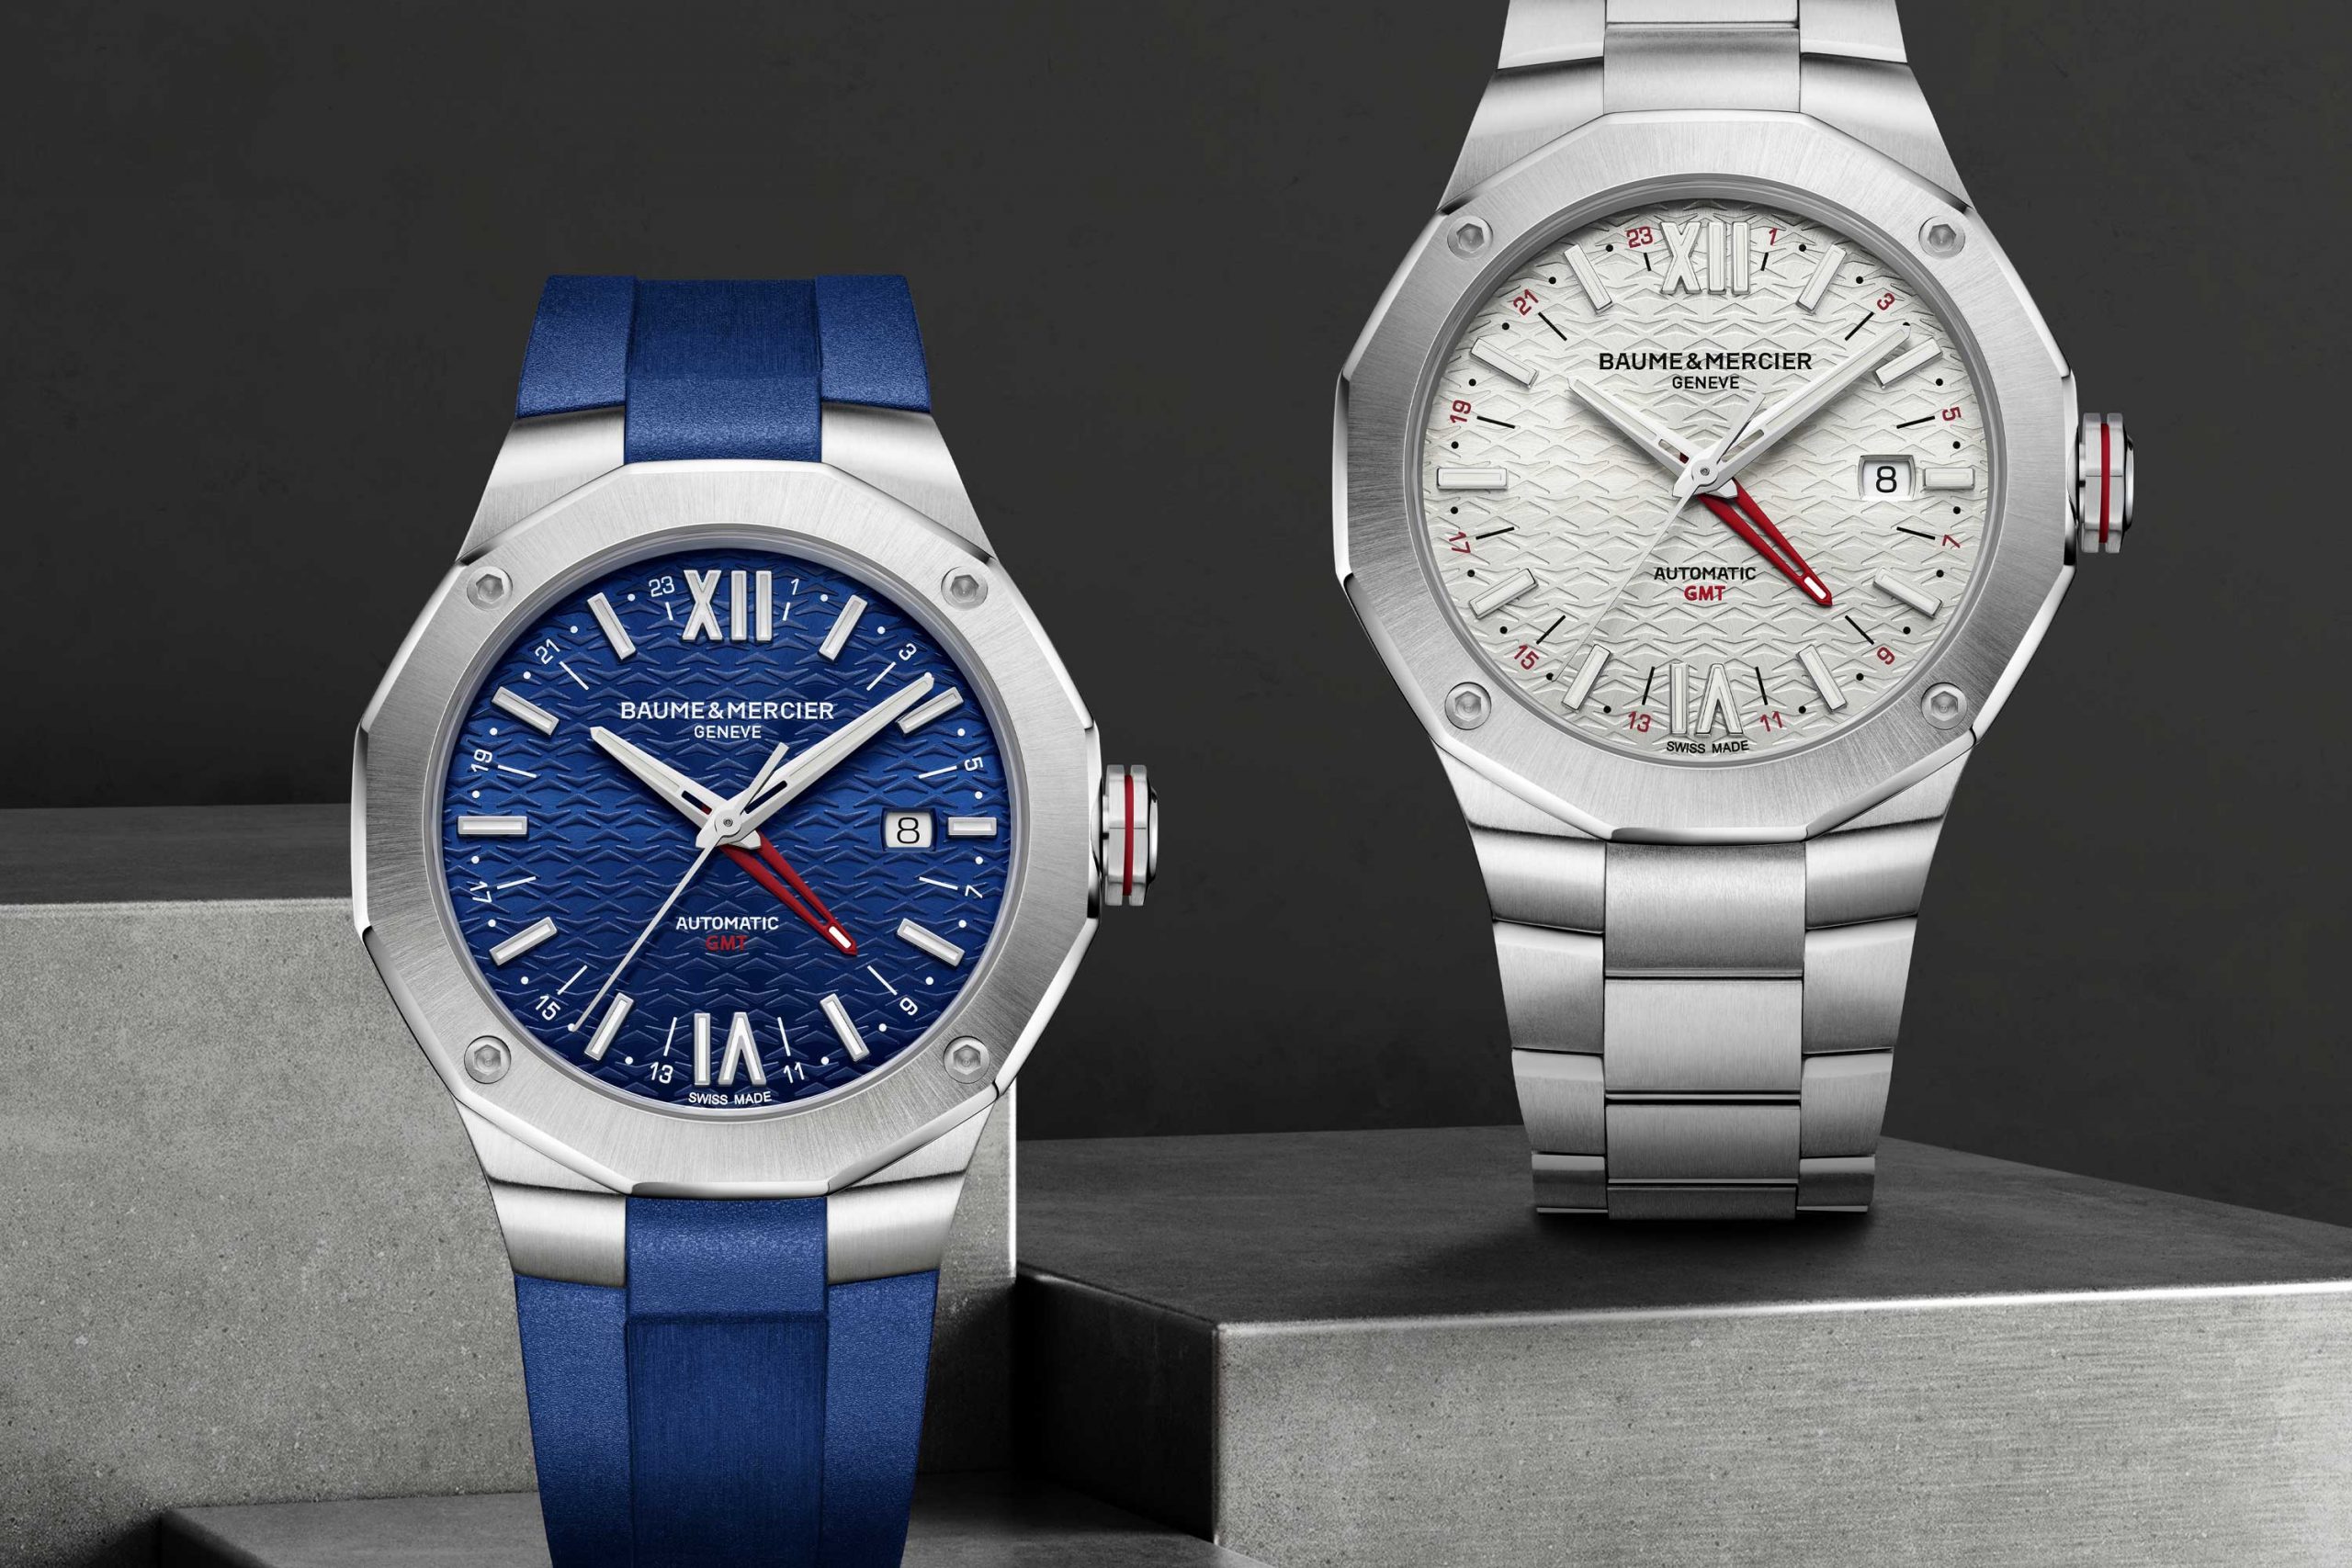 Baume & Mercier Riviera GMT M0A10659 and M0A10658